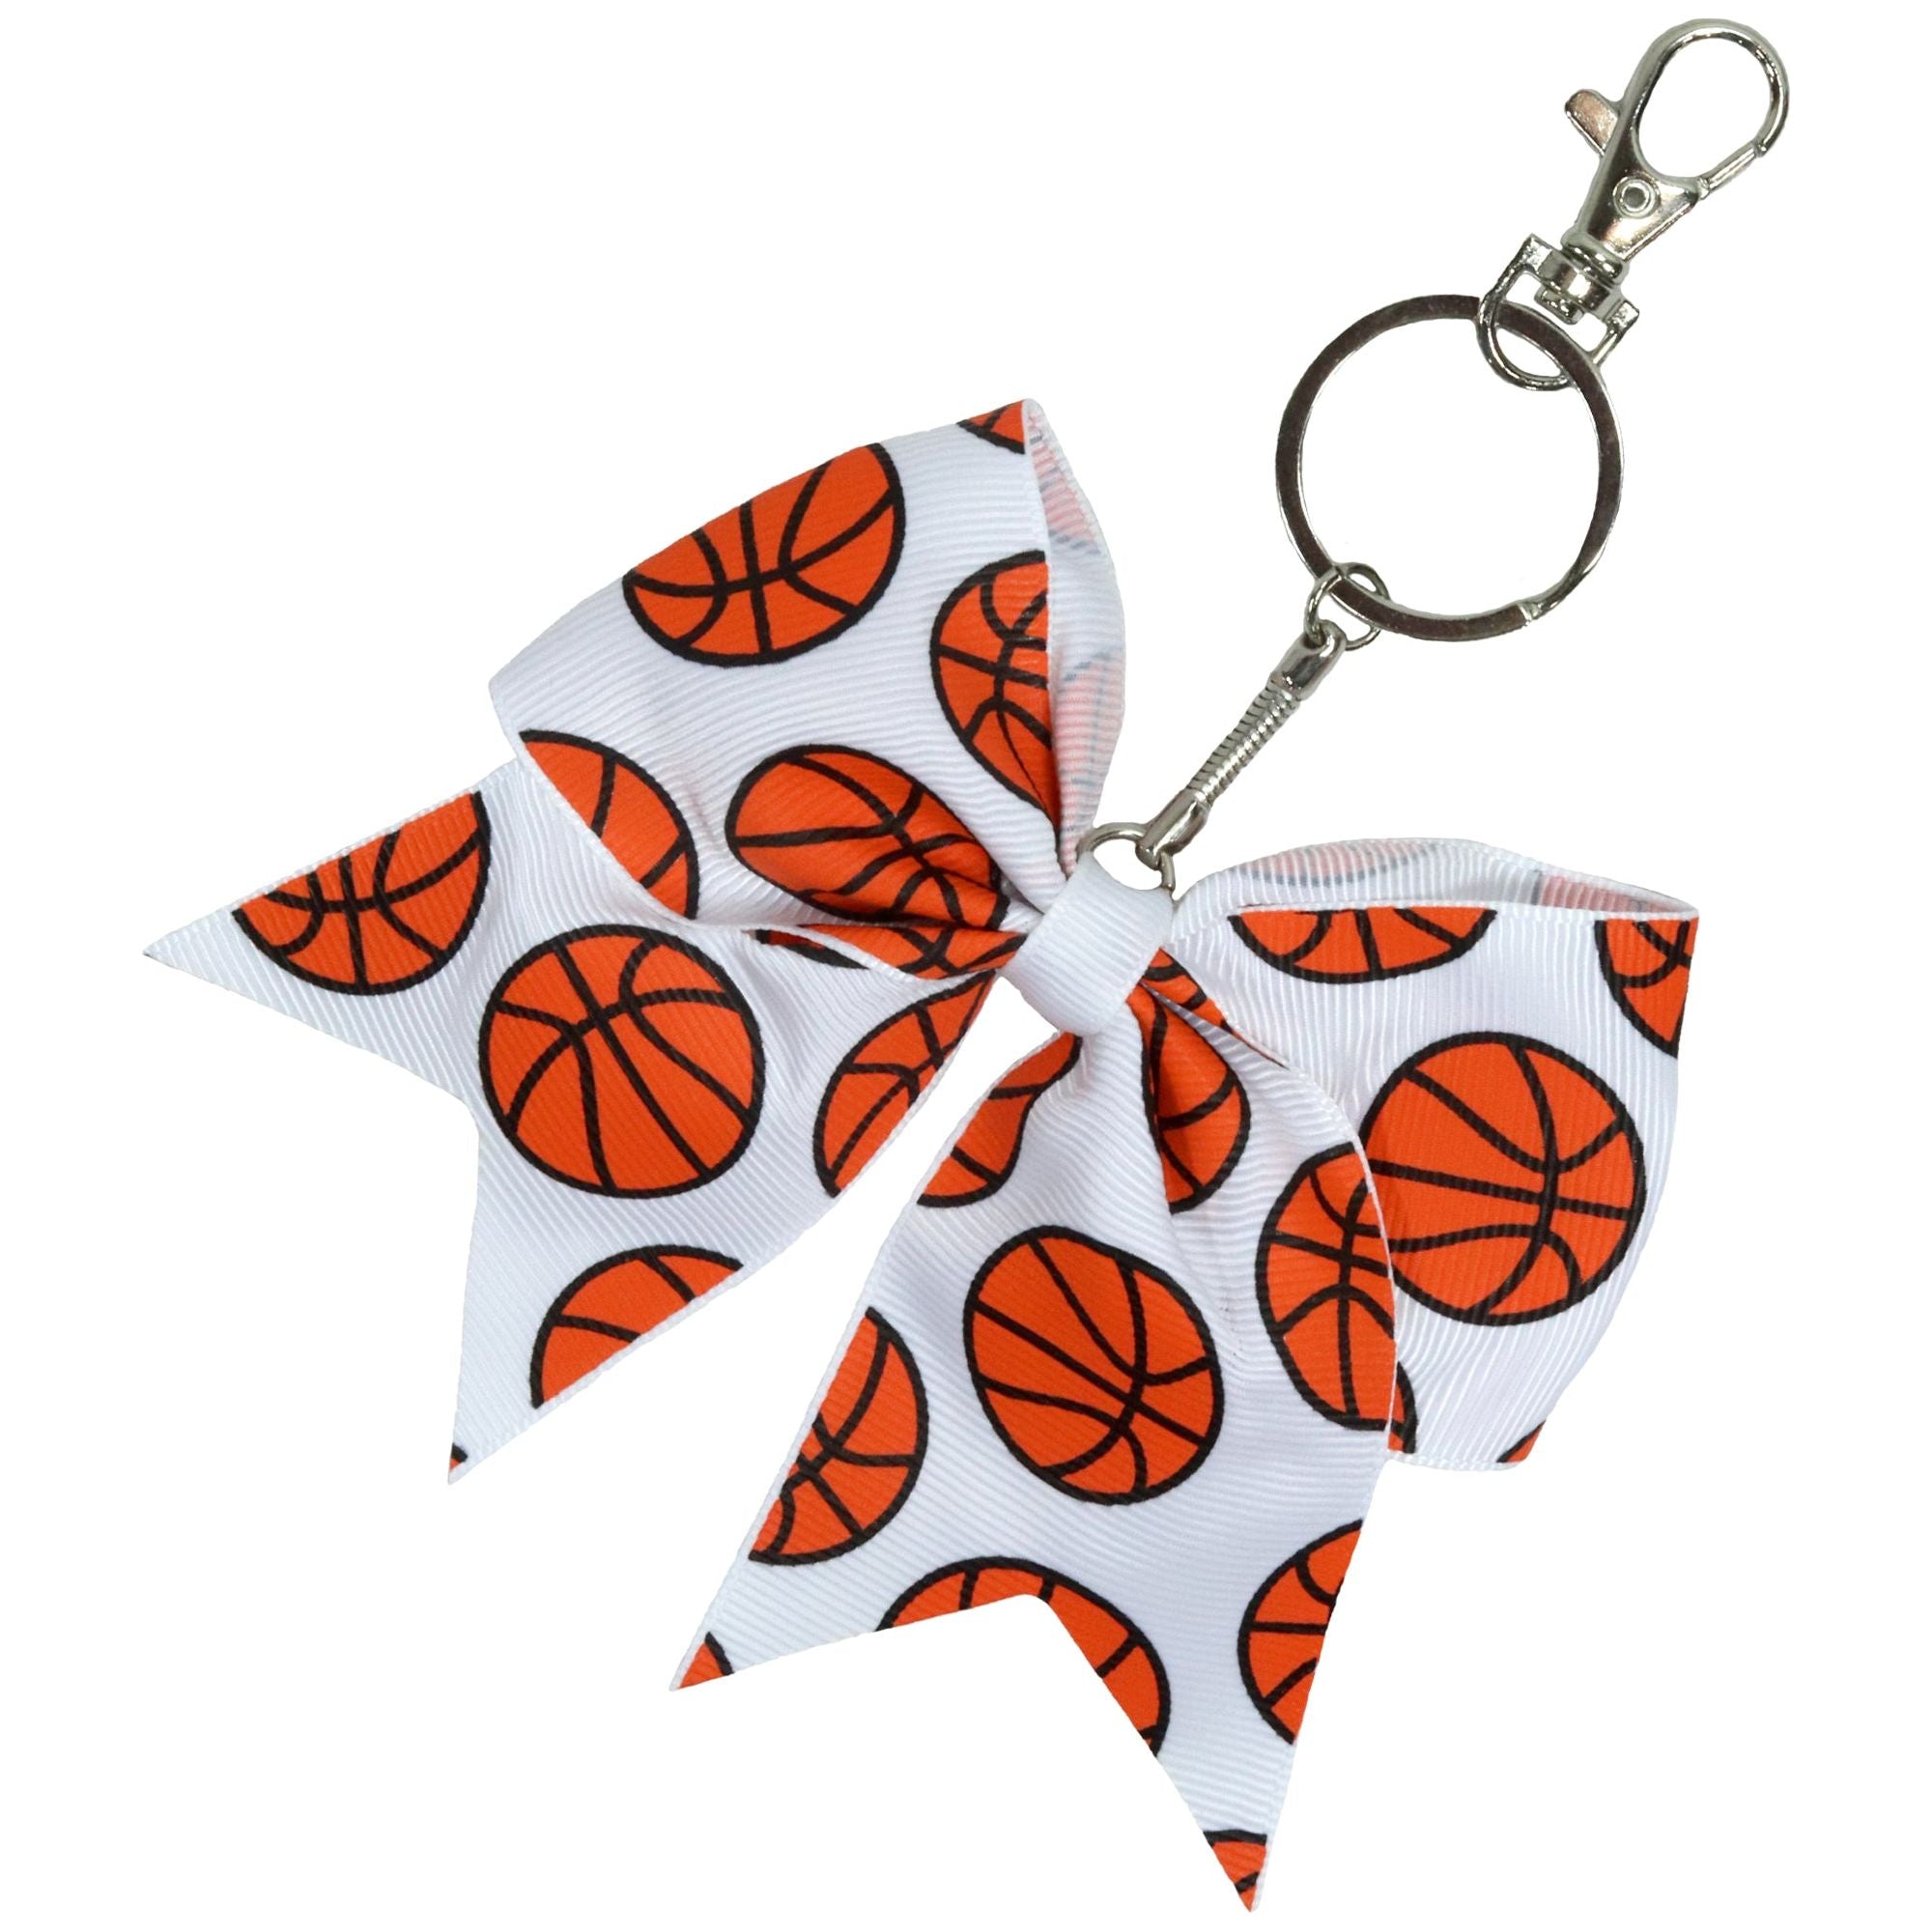 8 Piece Basketball Gift Hair Ties - Basketball Gifts for Boys & Girls,  Basketball Accessories for Boys, Players, Coaches, Basketball Team Gifts,  Gifts